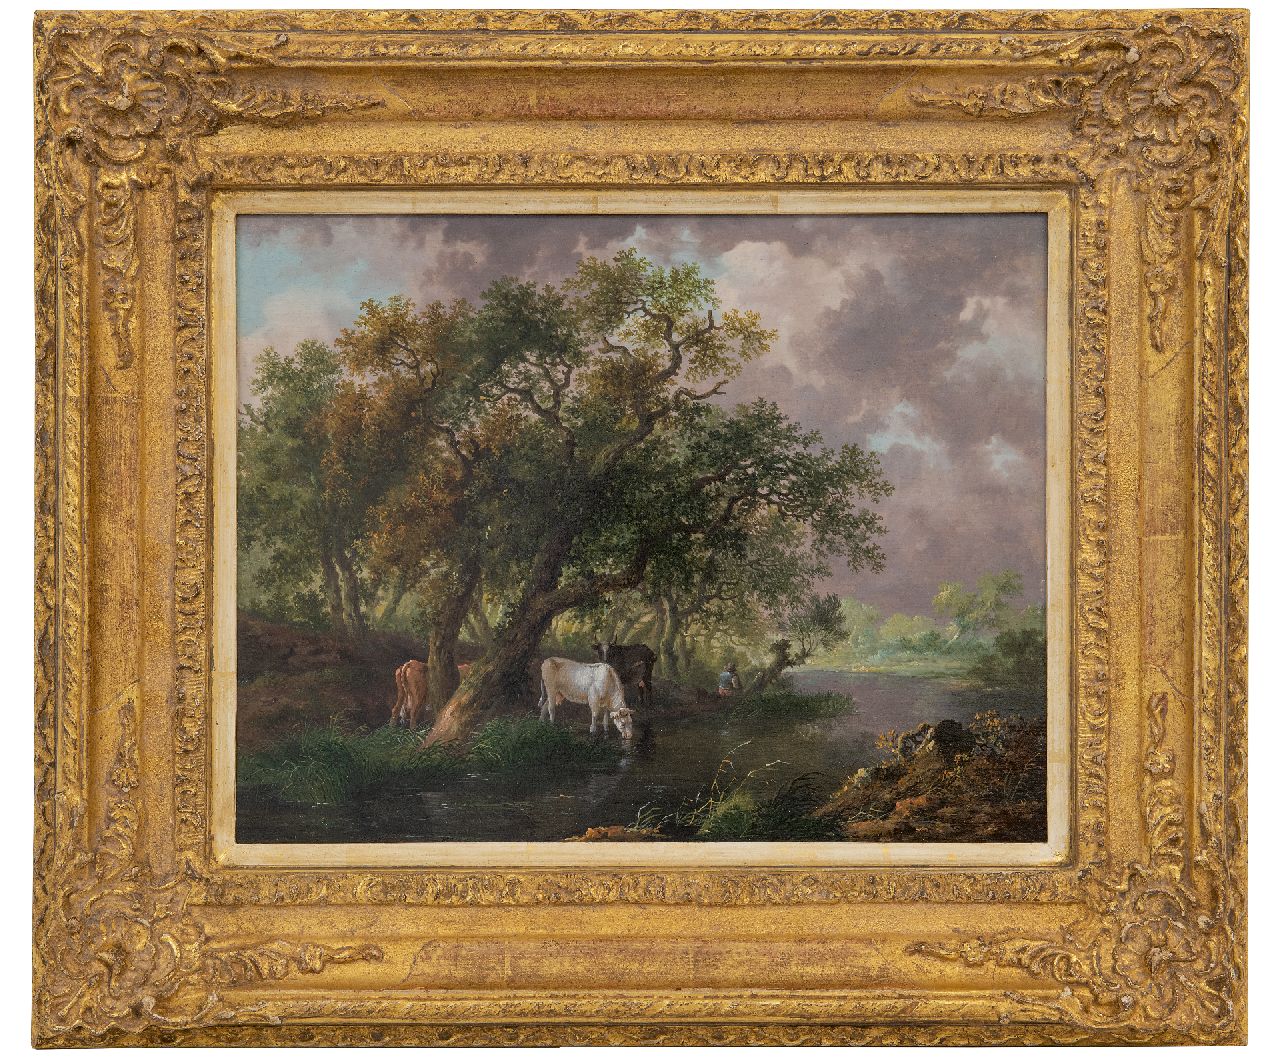 Renard F.T.  | Fredericus Theodorus Renard | Paintings offered for sale | Cattle watering by a wooded river, oil on panel 26.5 x 34.3 cm, signed (vague) on a label on the reverse and painted ca. 1815, without frame